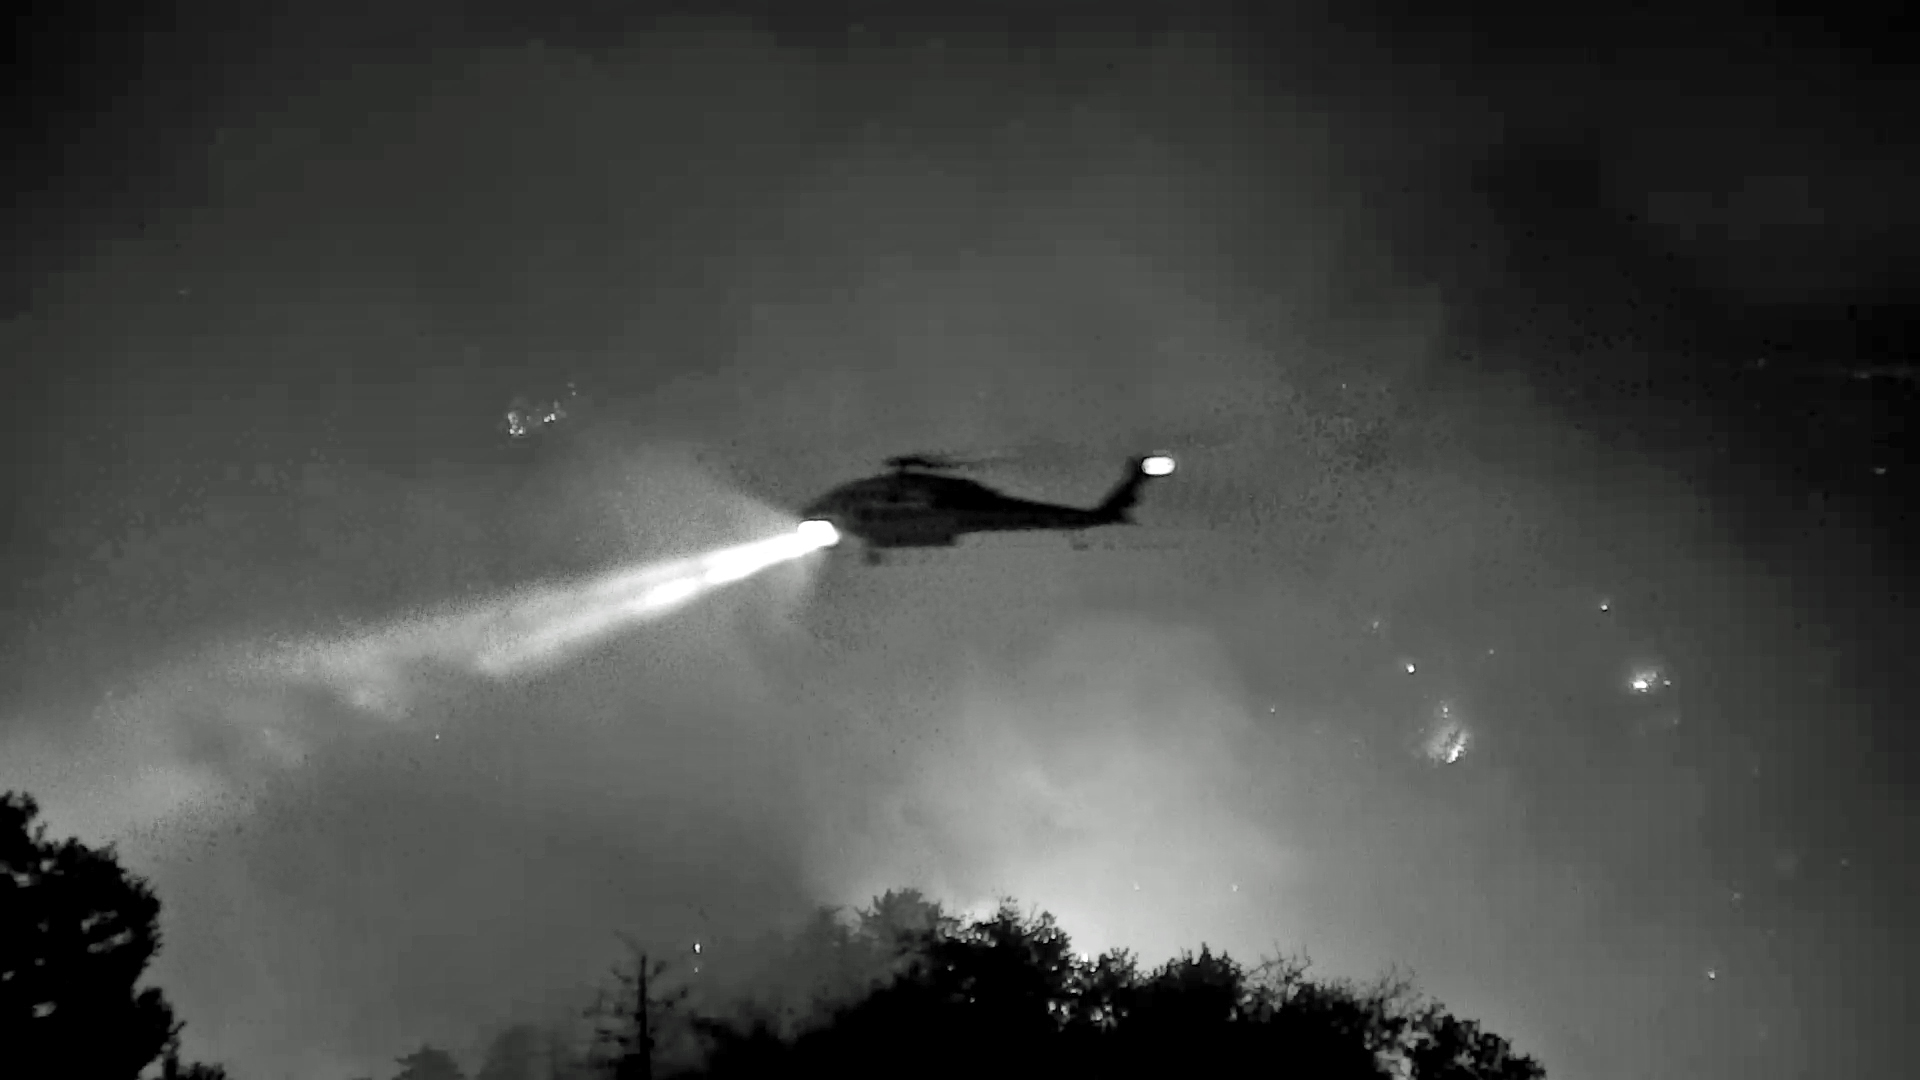 slide 2 - A black and white image taken from a web-camera that shows the dark silhouette of a helicopter against a grainy sky in shades of gray and candlelight. A beacon of bright light erupts from the helicopter and shines down on the tree canopies seen at the very bottom edge of the photo. 